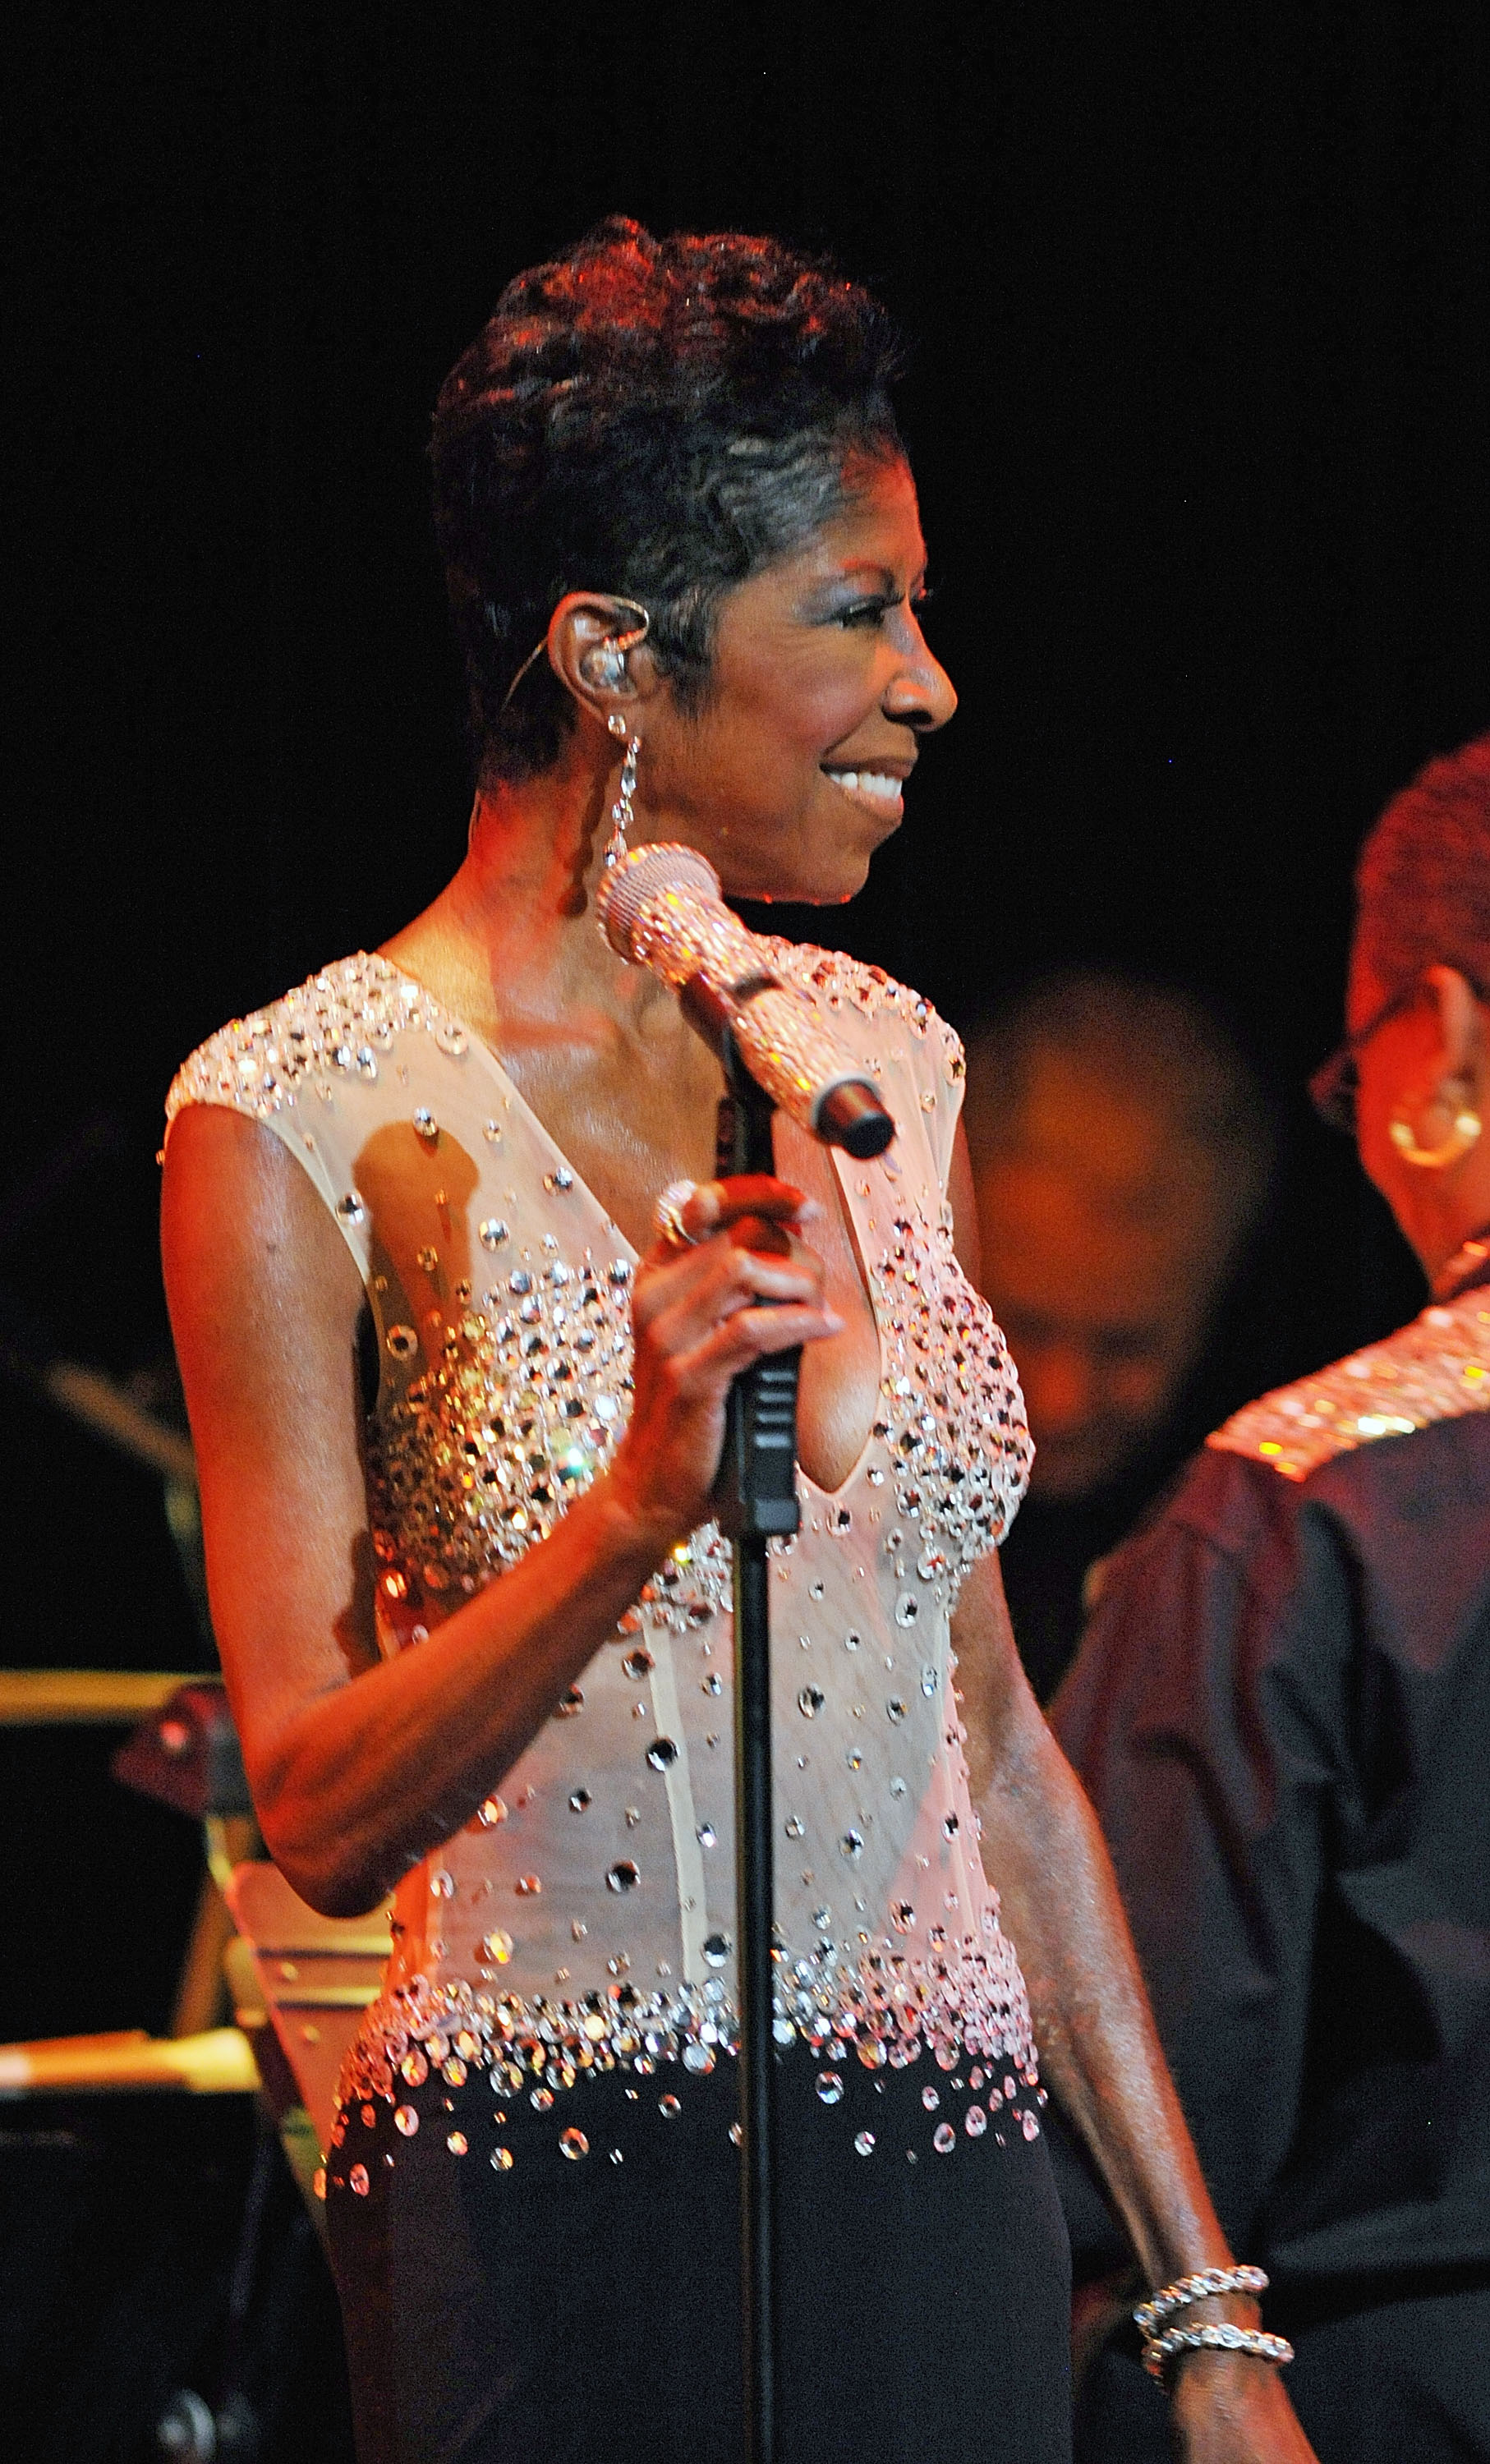 Natalie Cole In Concert - New York, NY